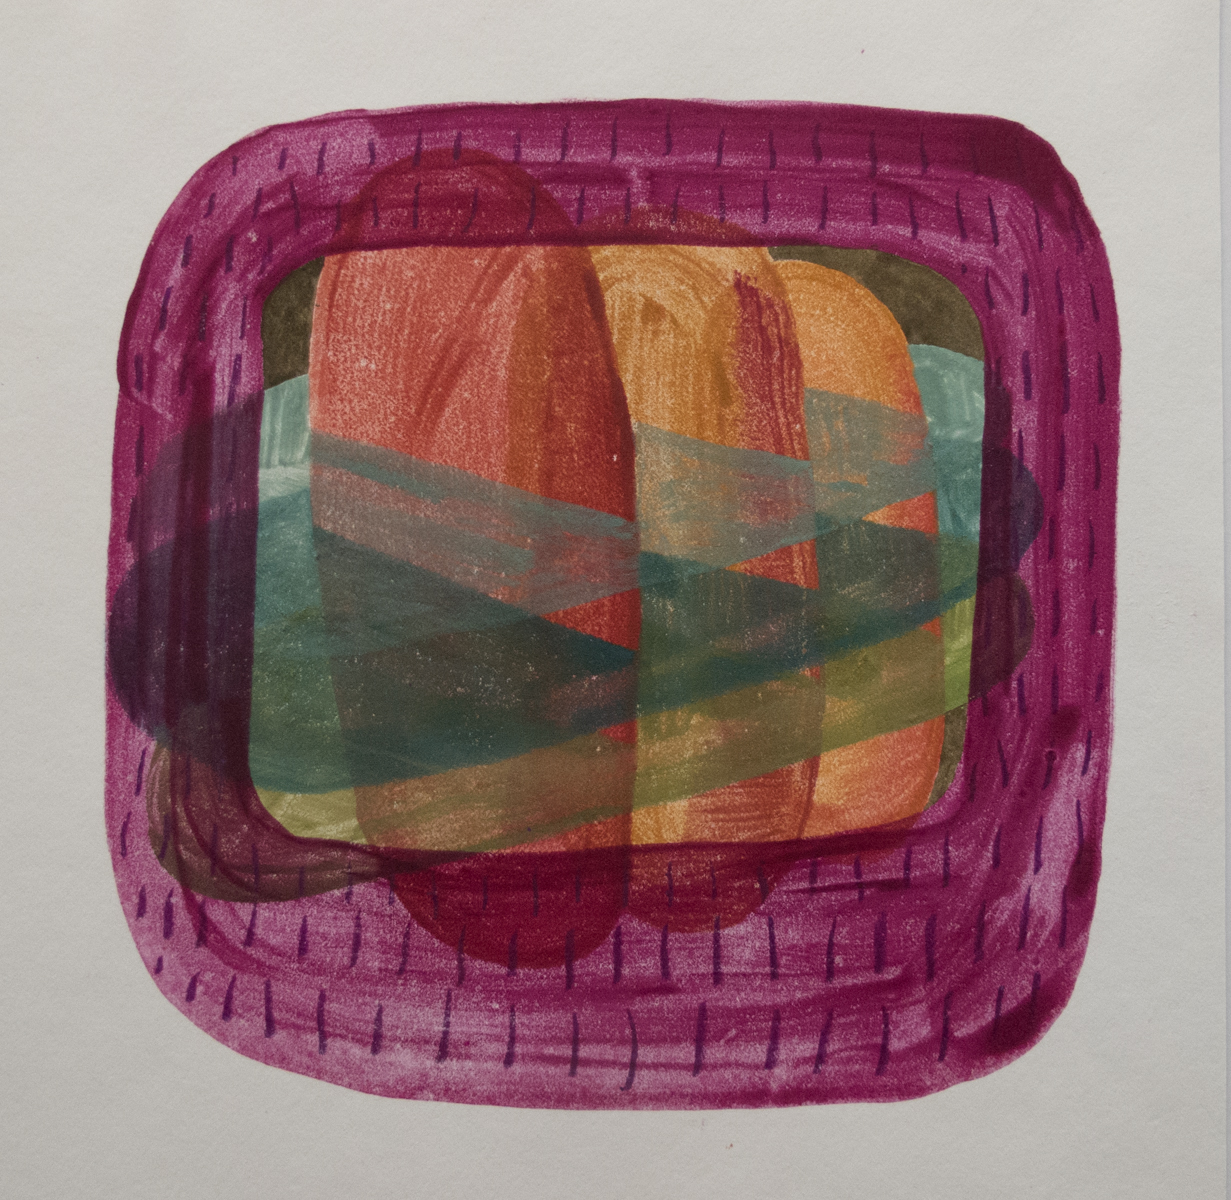  Tyler Green   Pickled Beet Chip Dip   Monotype 